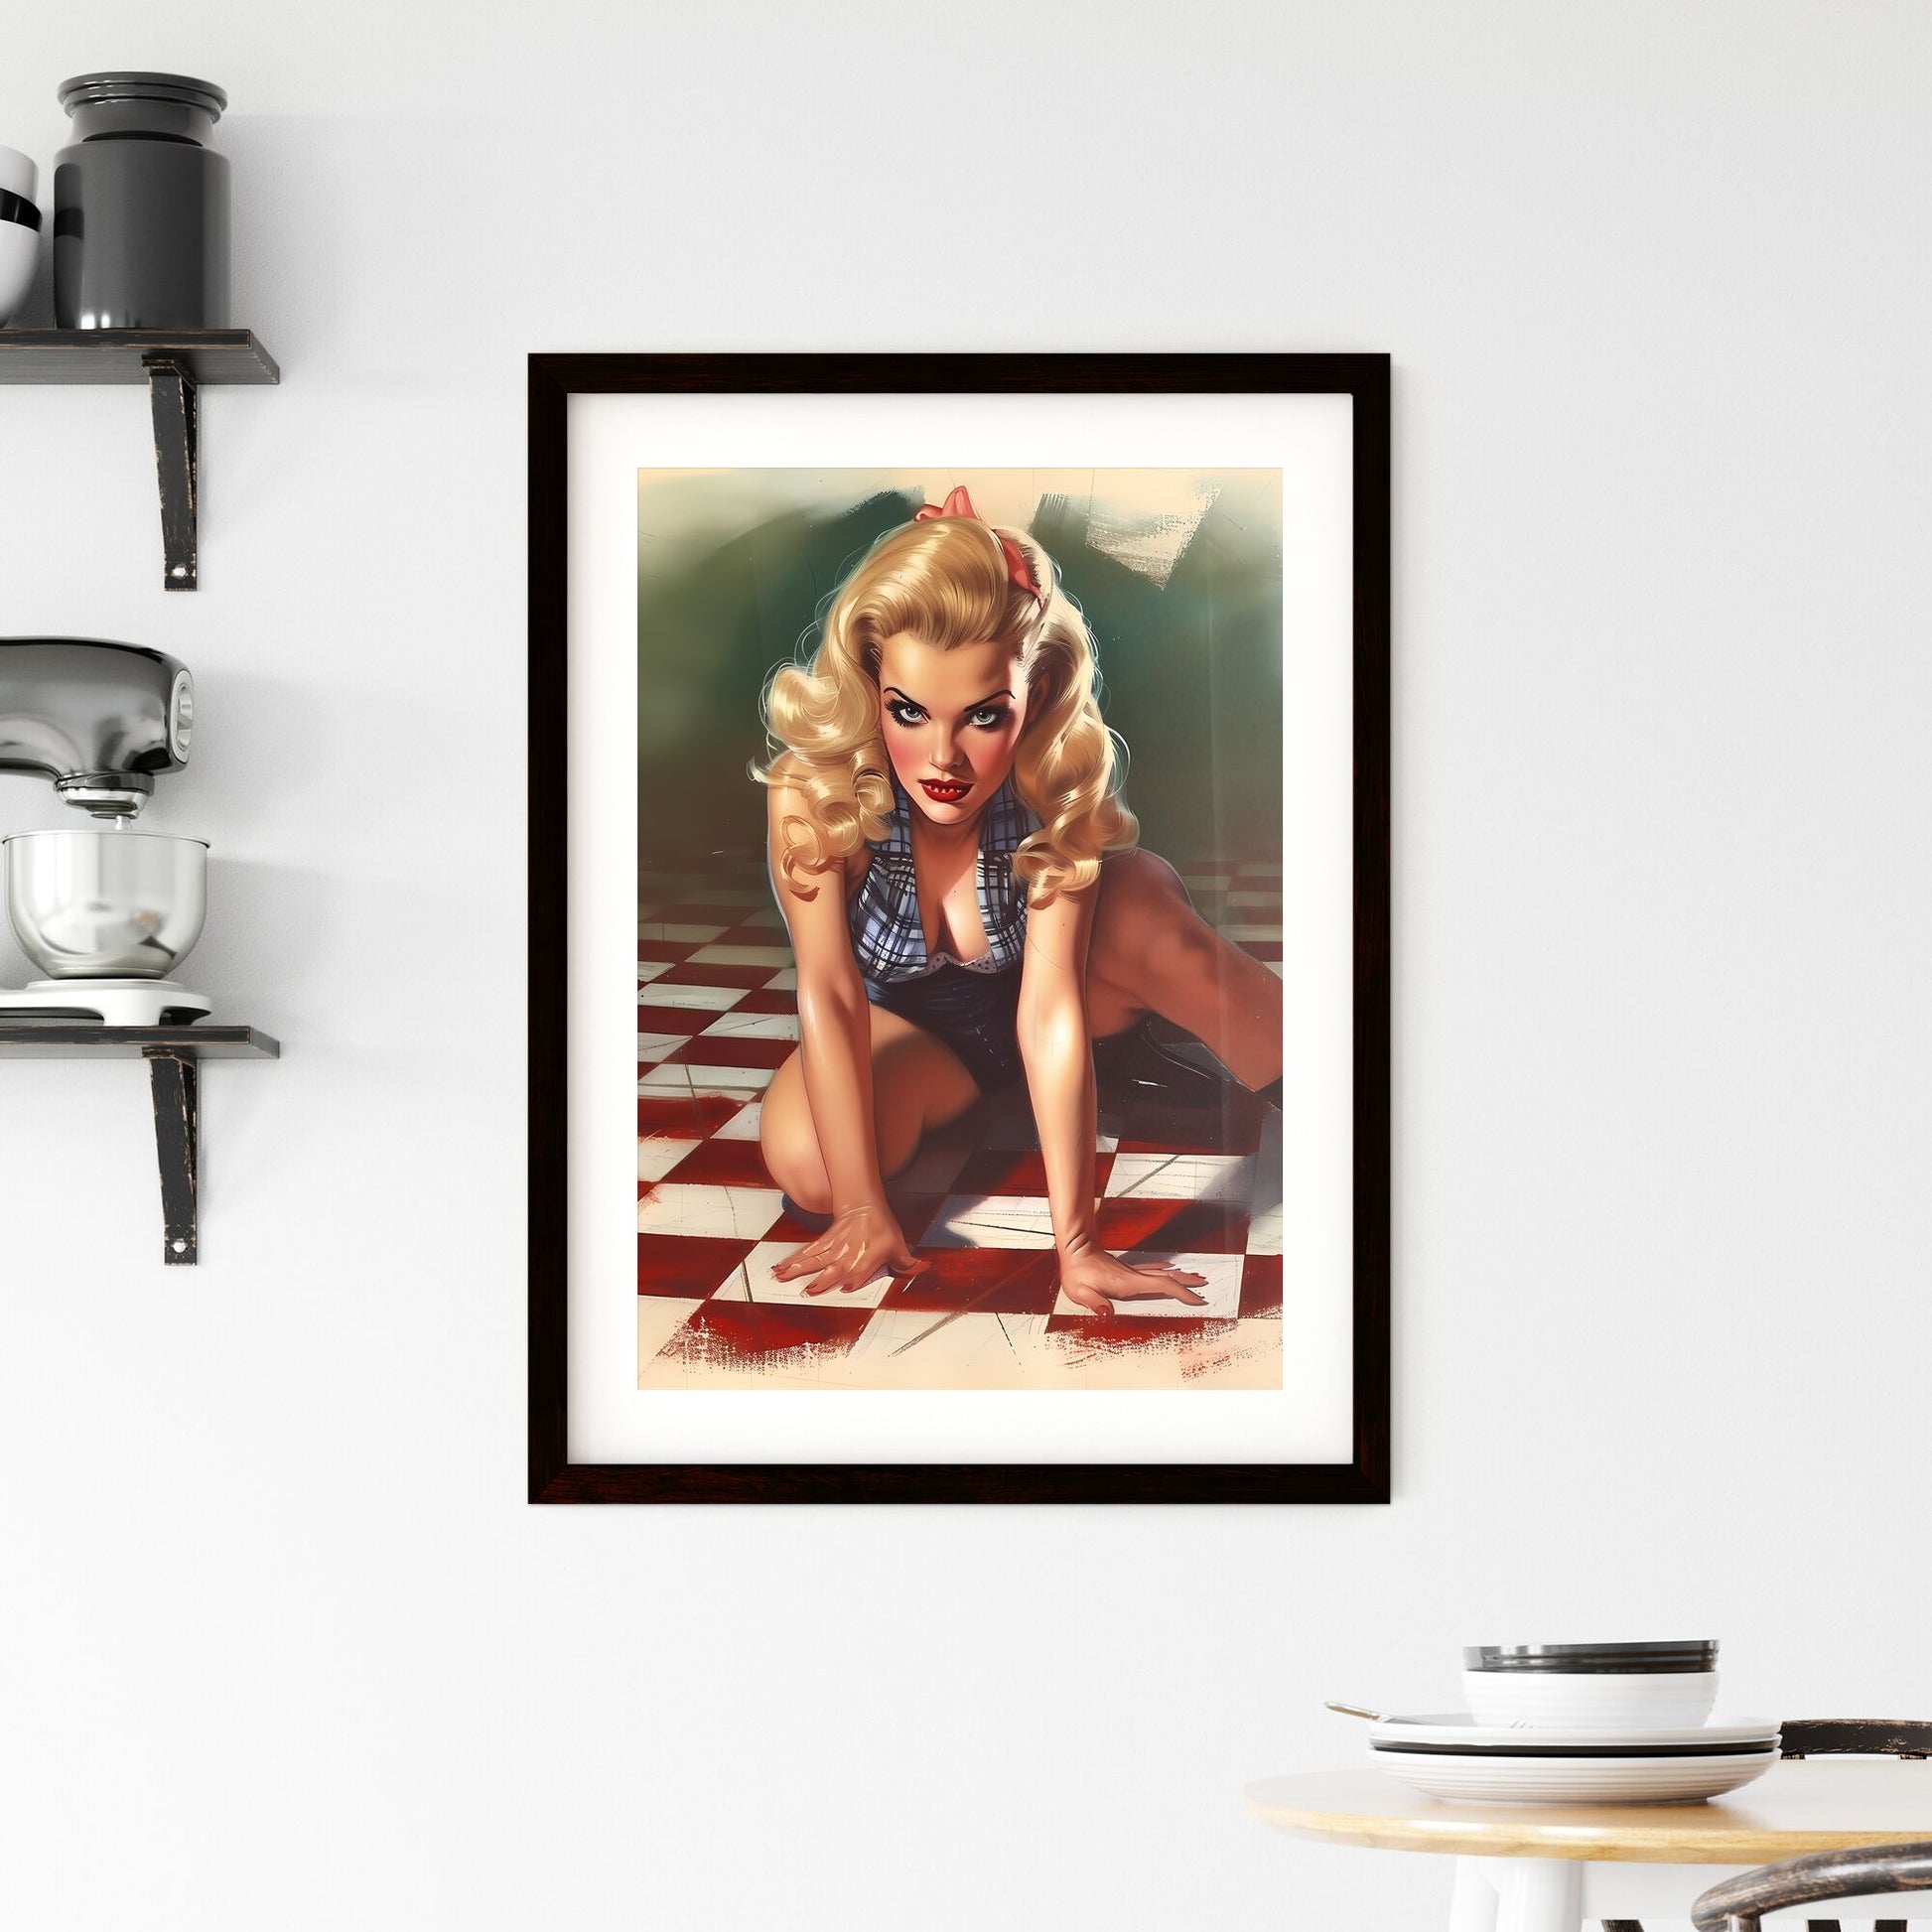 Watercolour rockabilly pin up girl pretty takes a move on dance floor - Art print of a woman with blonde hair and red lips Default Title